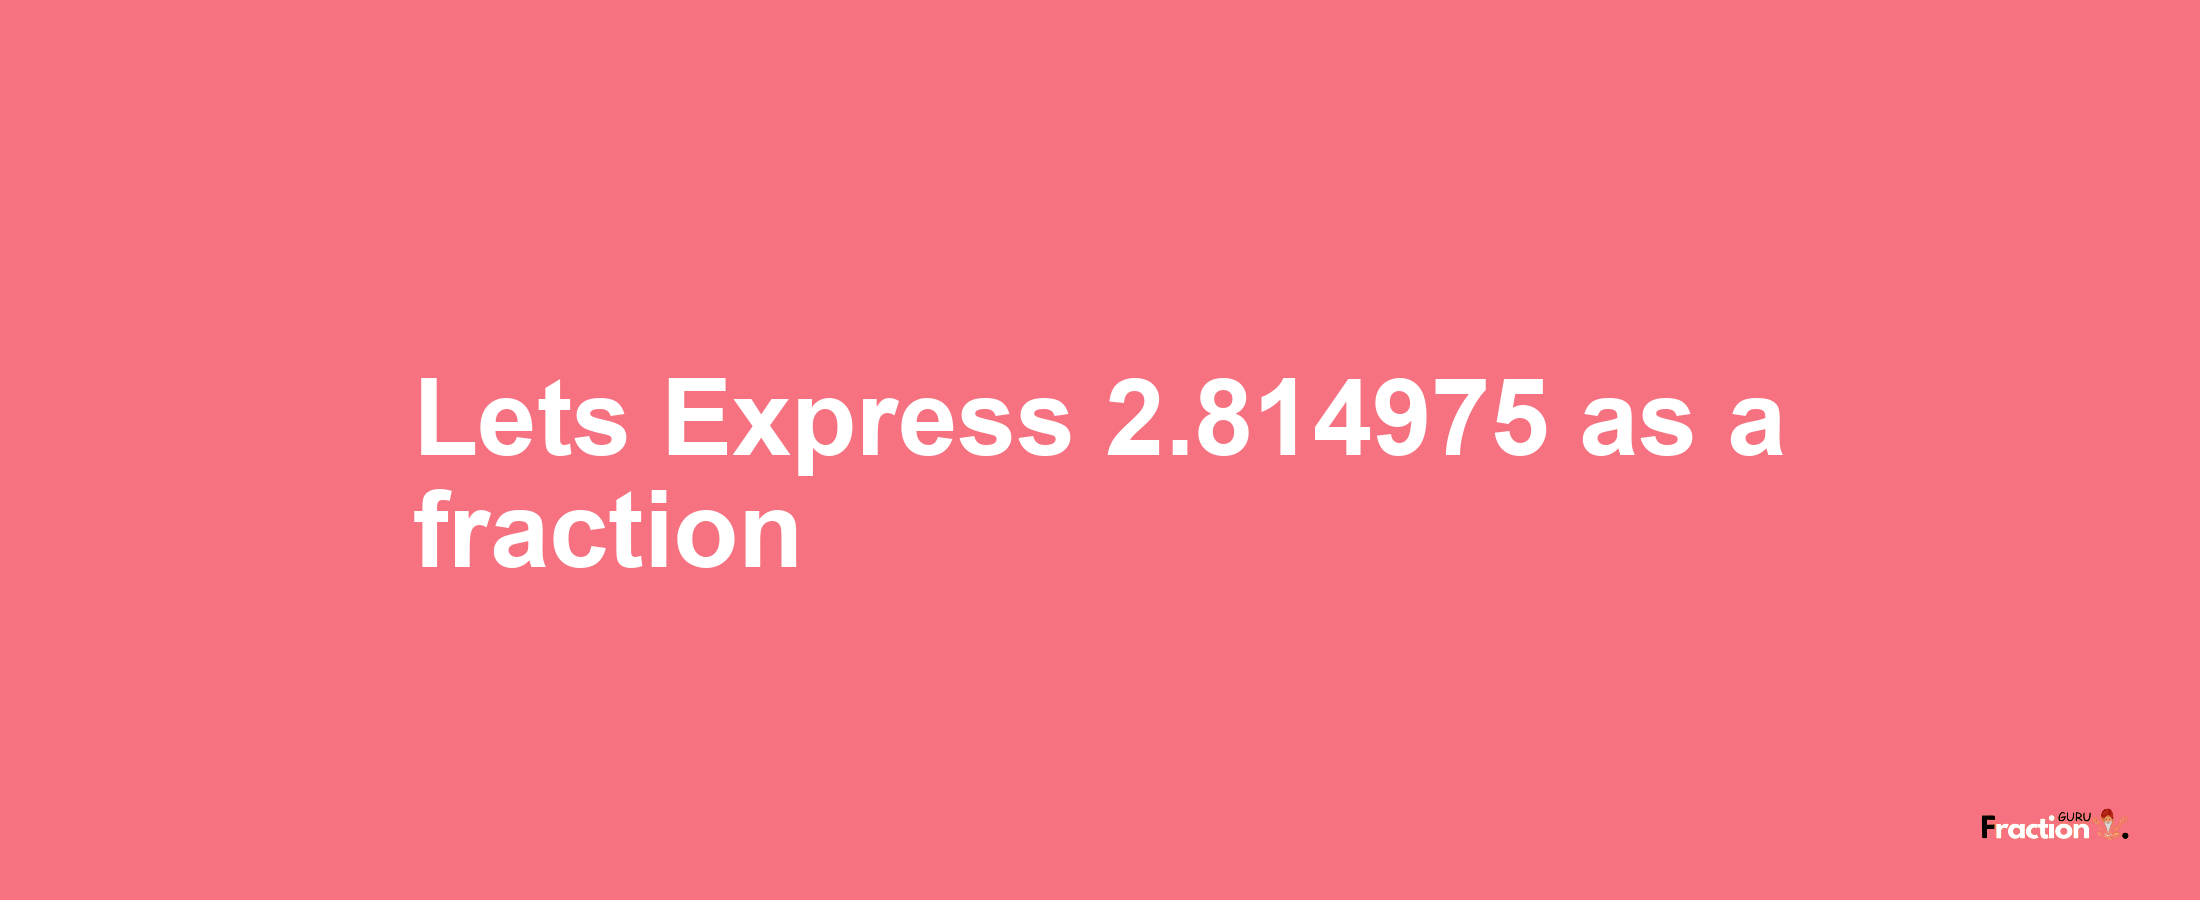 Lets Express 2.814975 as afraction